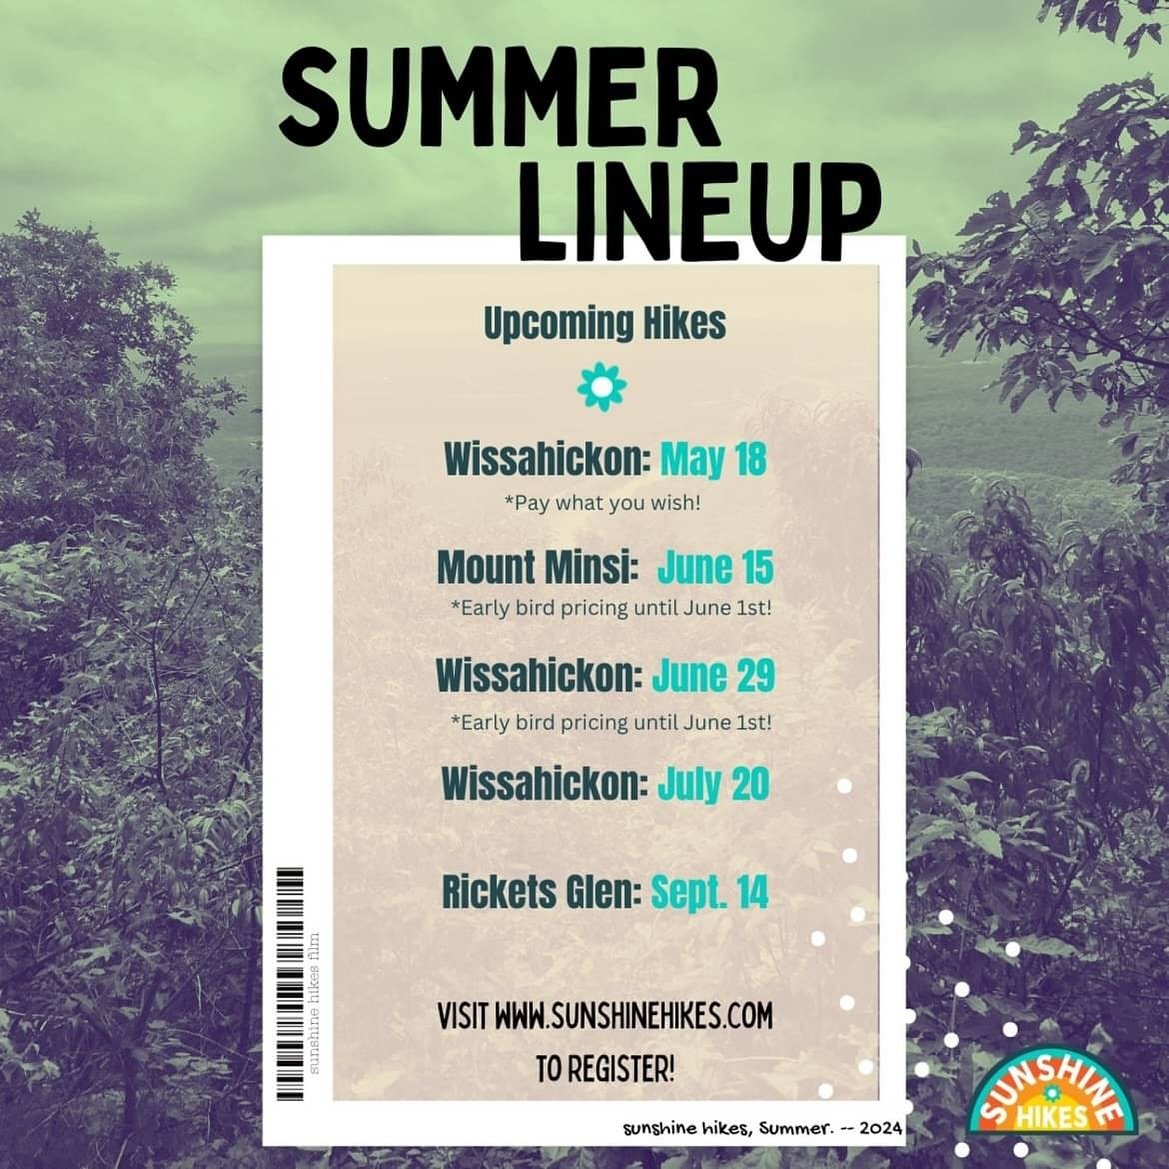 Here it is! Our Summer line up ☀️😎☀️

Which hike (or hikessss) are you going to??